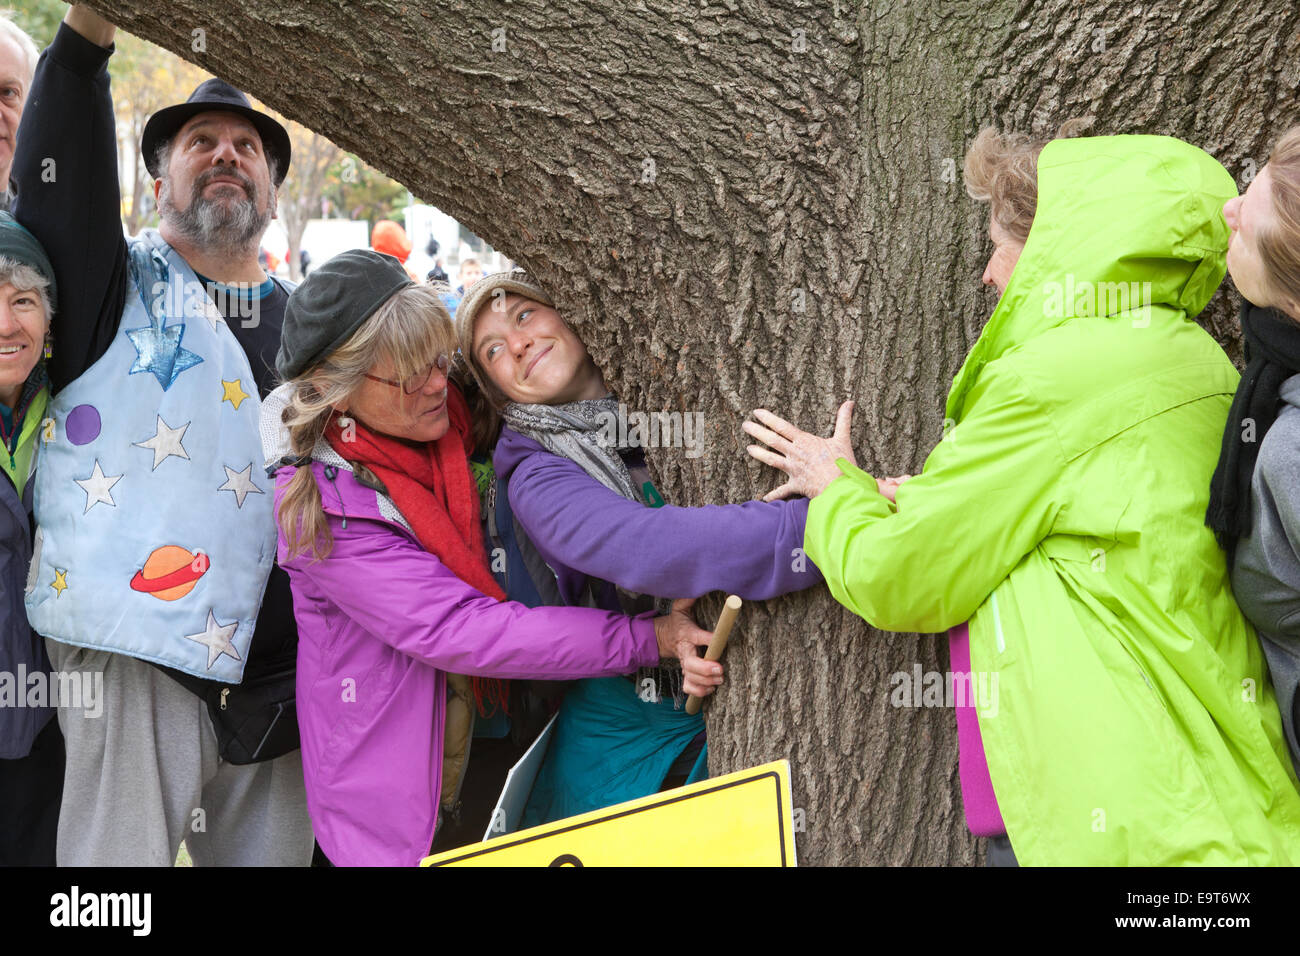 Washington DC, USA. 01st Nov, 2014. November, 01, 2014, Washington, DC USA: Ed Fallon, the founder of The Great March for Climate Action, along with members and supporters of Climate Action, rallied in Washington, DC, ending their 9 month march across the country which they set out from Los Angeles on March 1st. Credit:  B Christopher/Alamy Live News Stock Photo